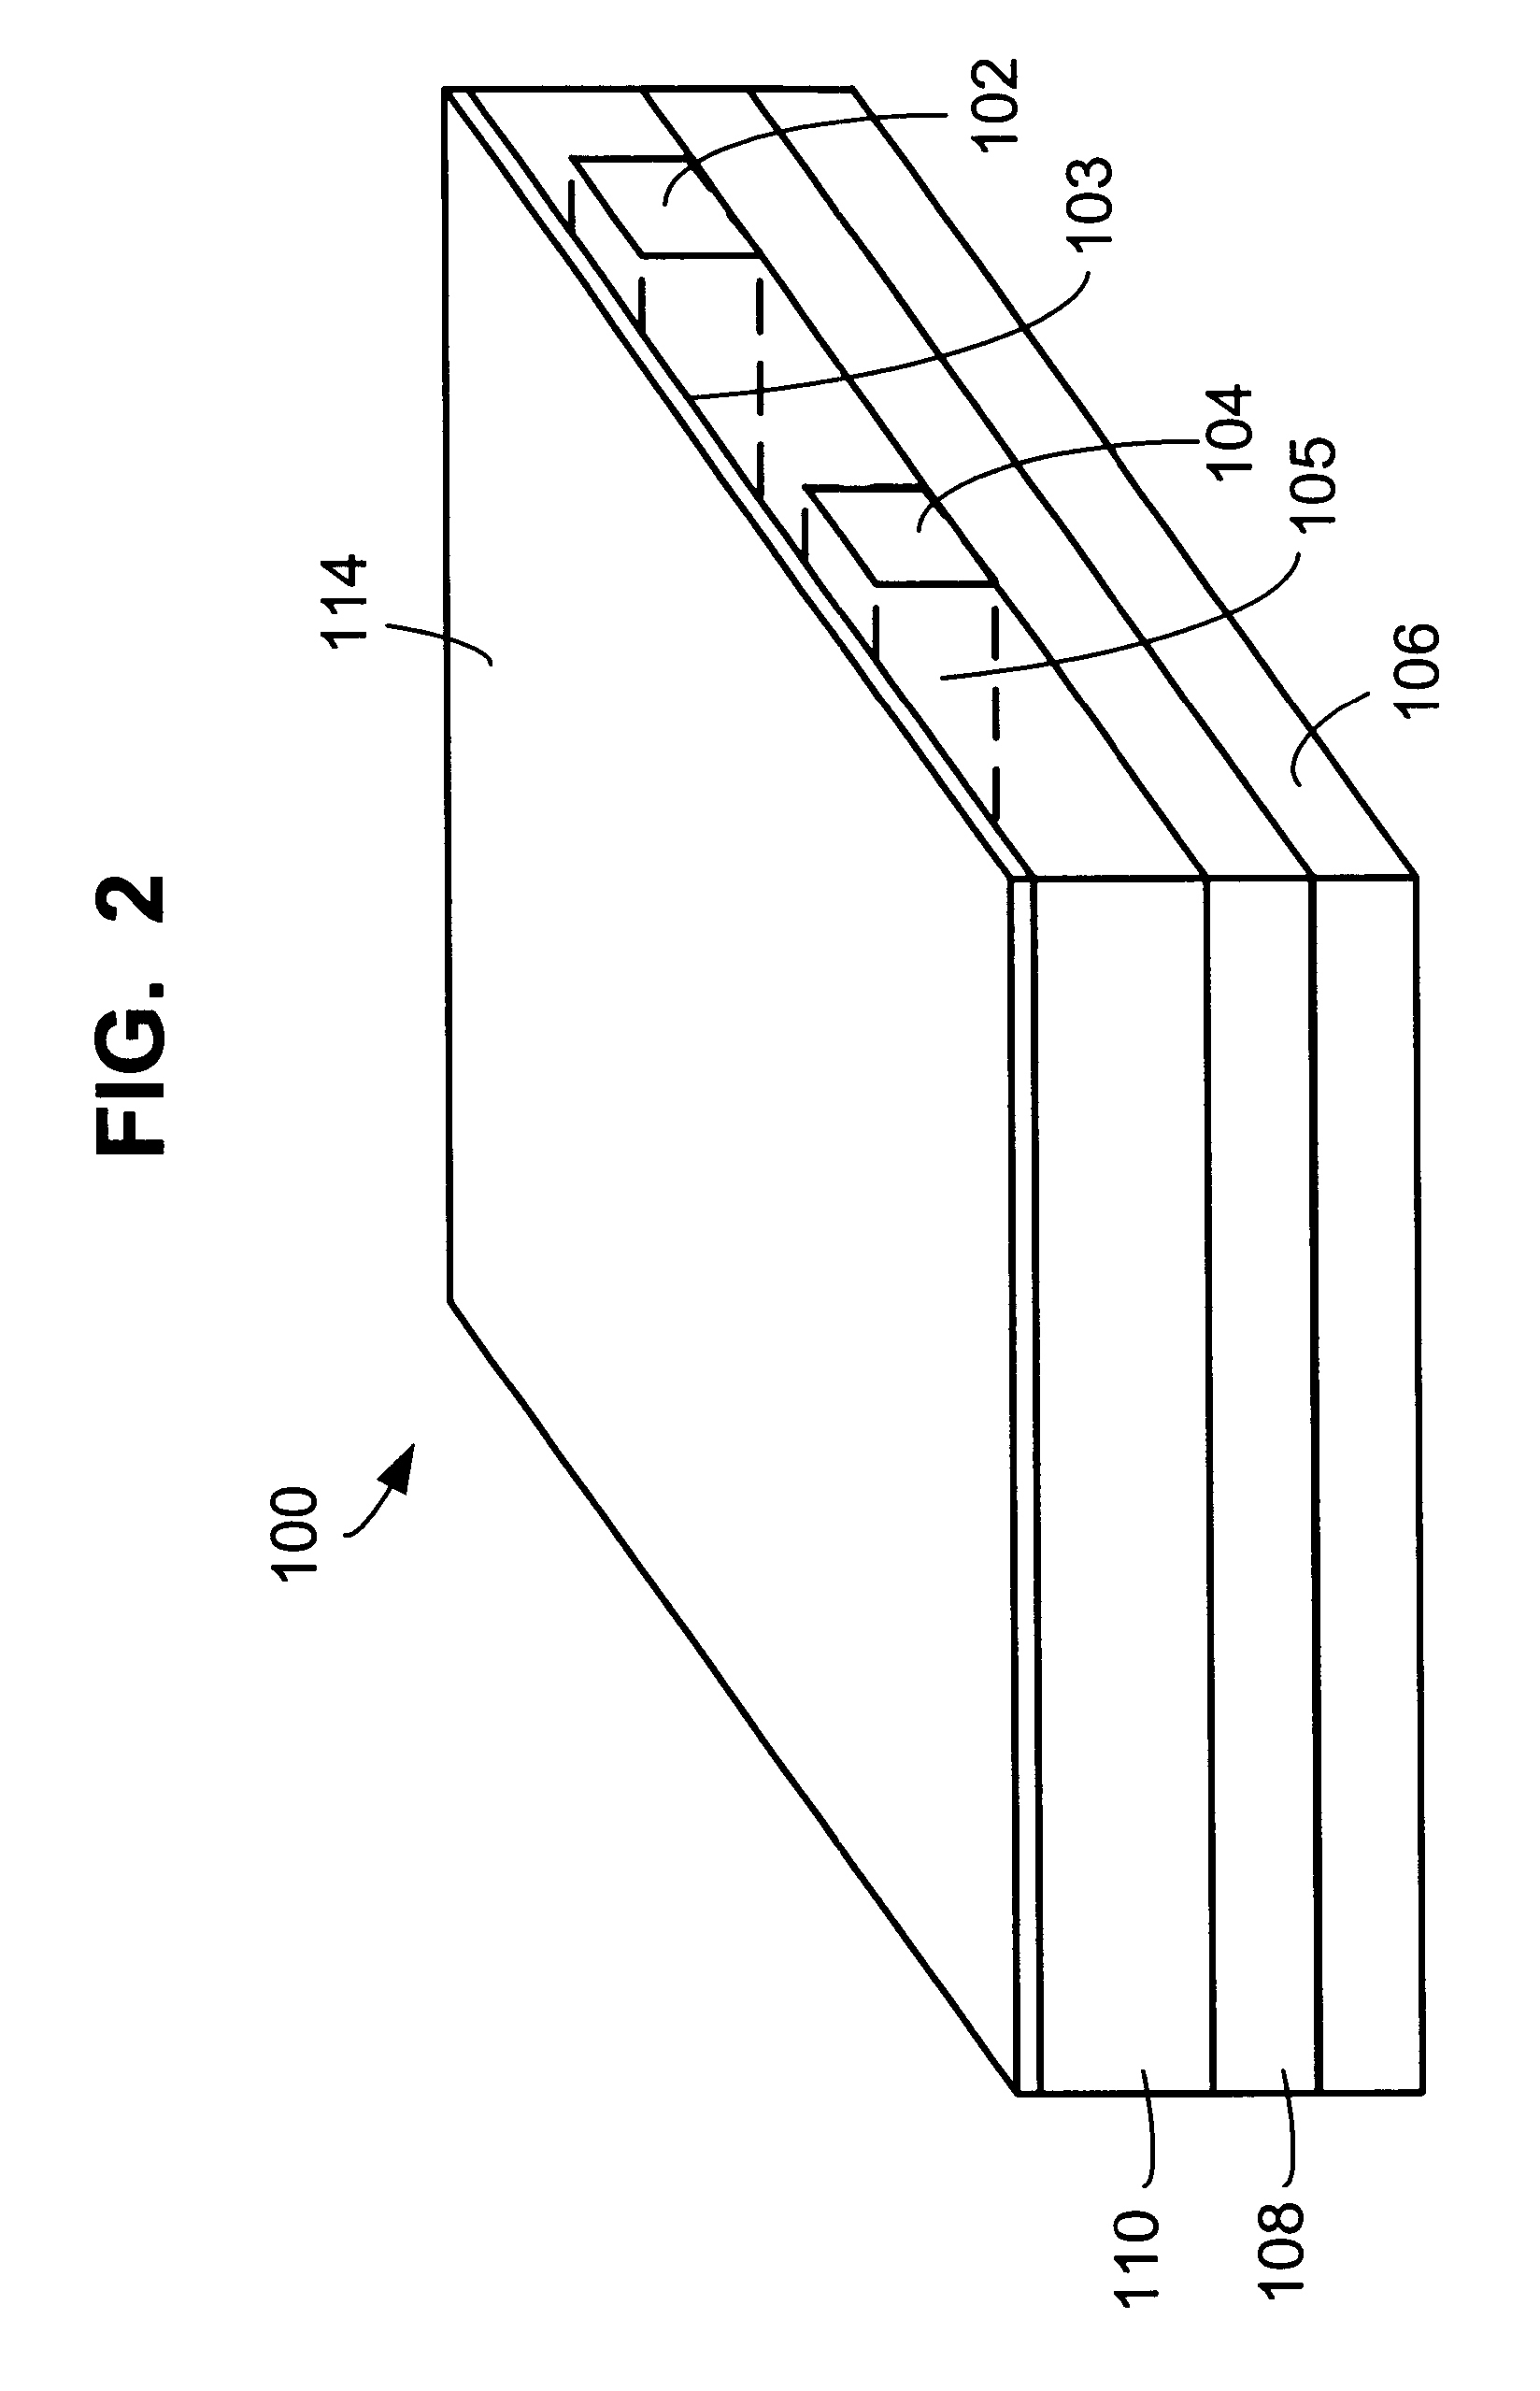 Method of precision fabrication by light exposure and structure of tunable waveguide bragg grating